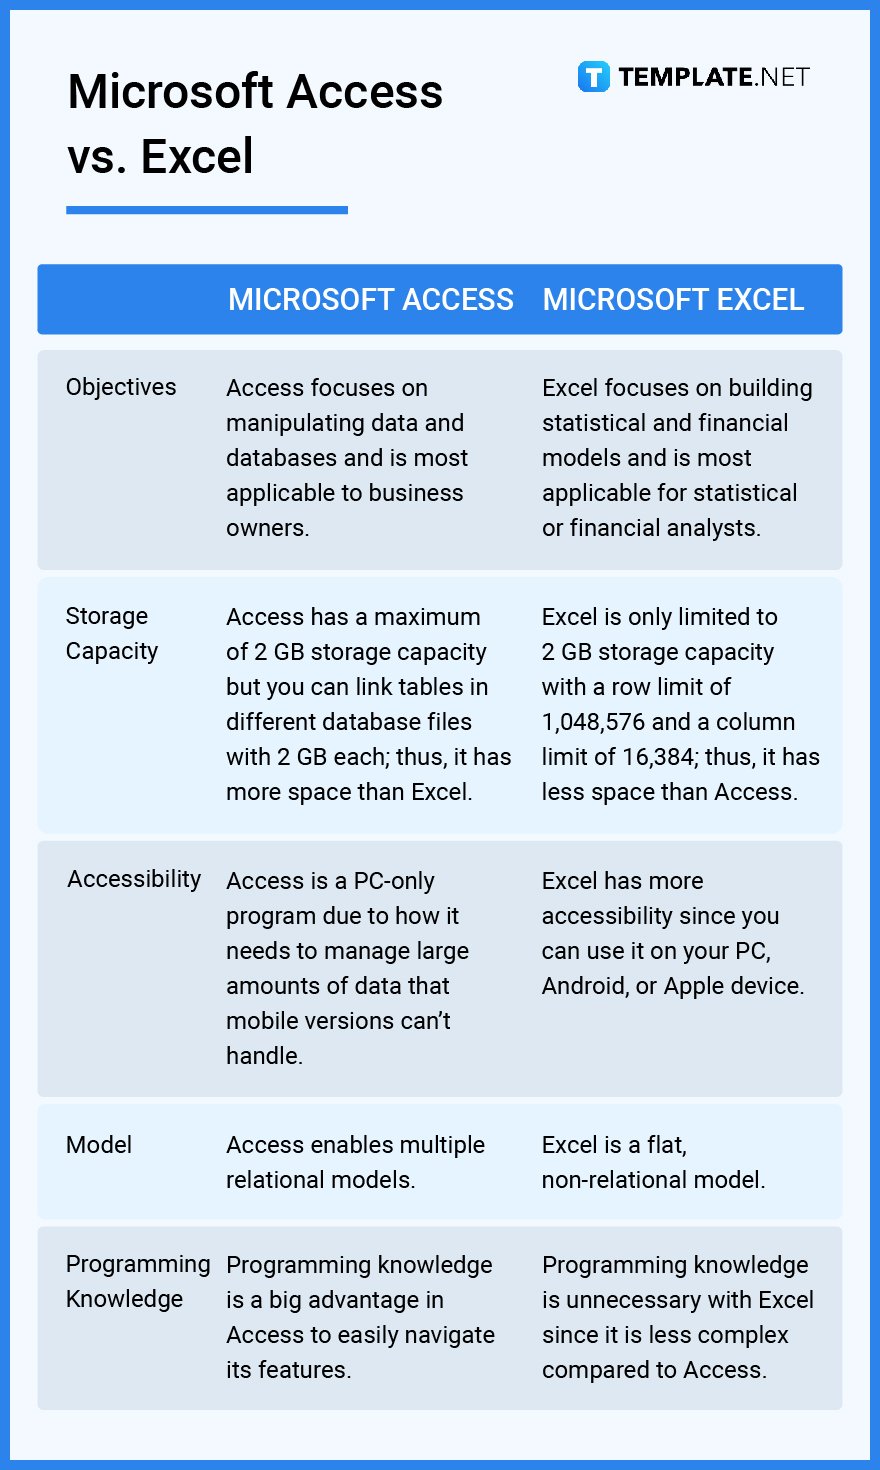 Microsoft Access - What is Microsoft Access? Definition, Uses